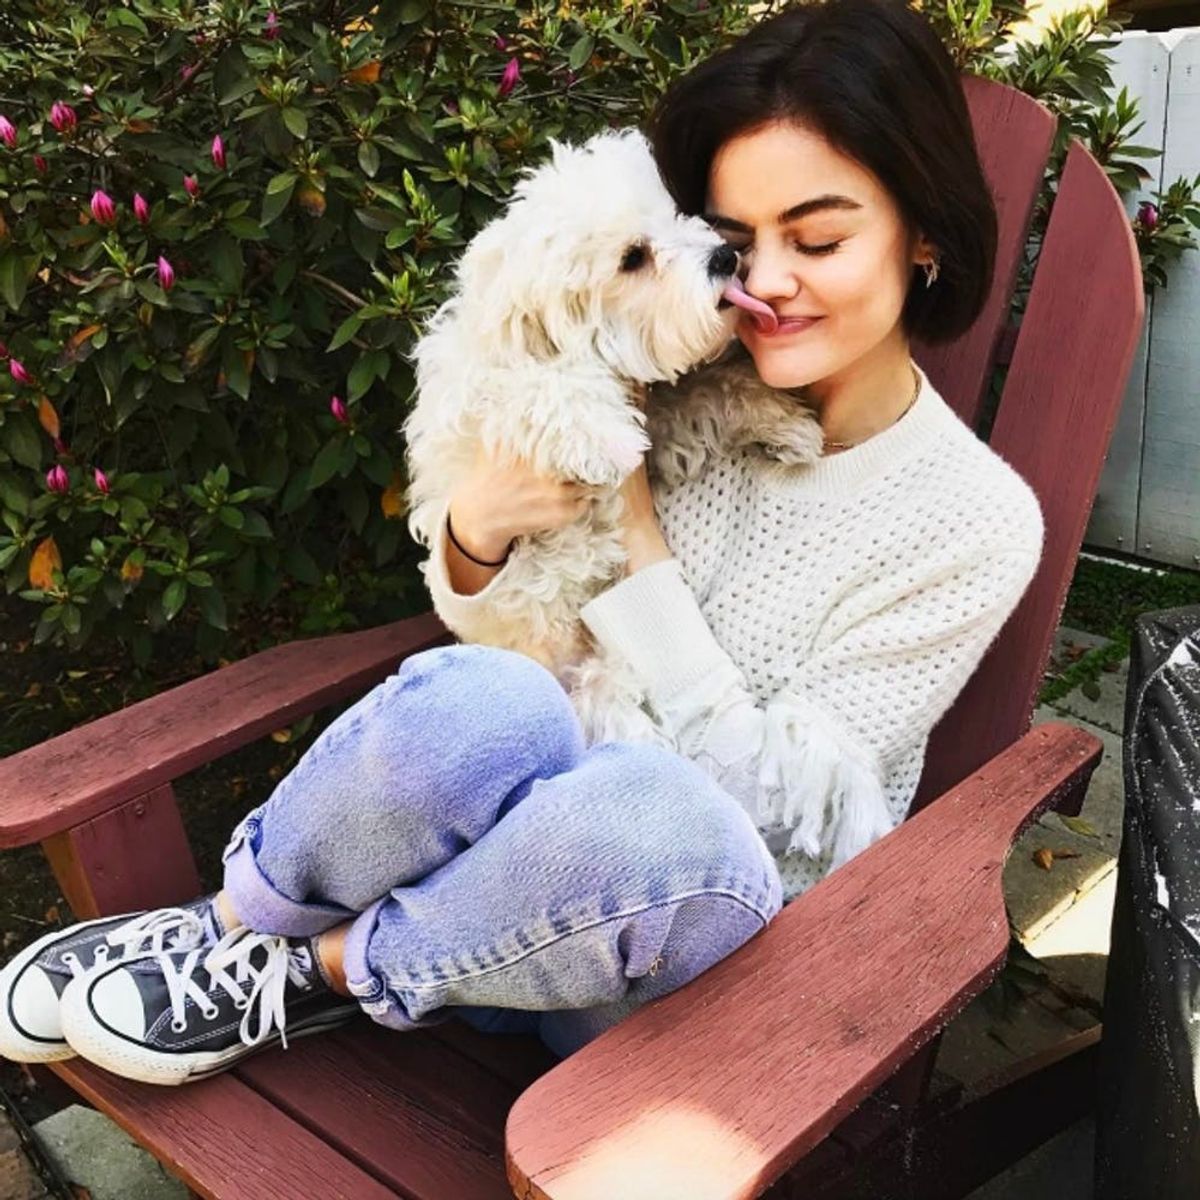 11 Pics of Celebrities and Their Dogs That’ll Brighten Your Day